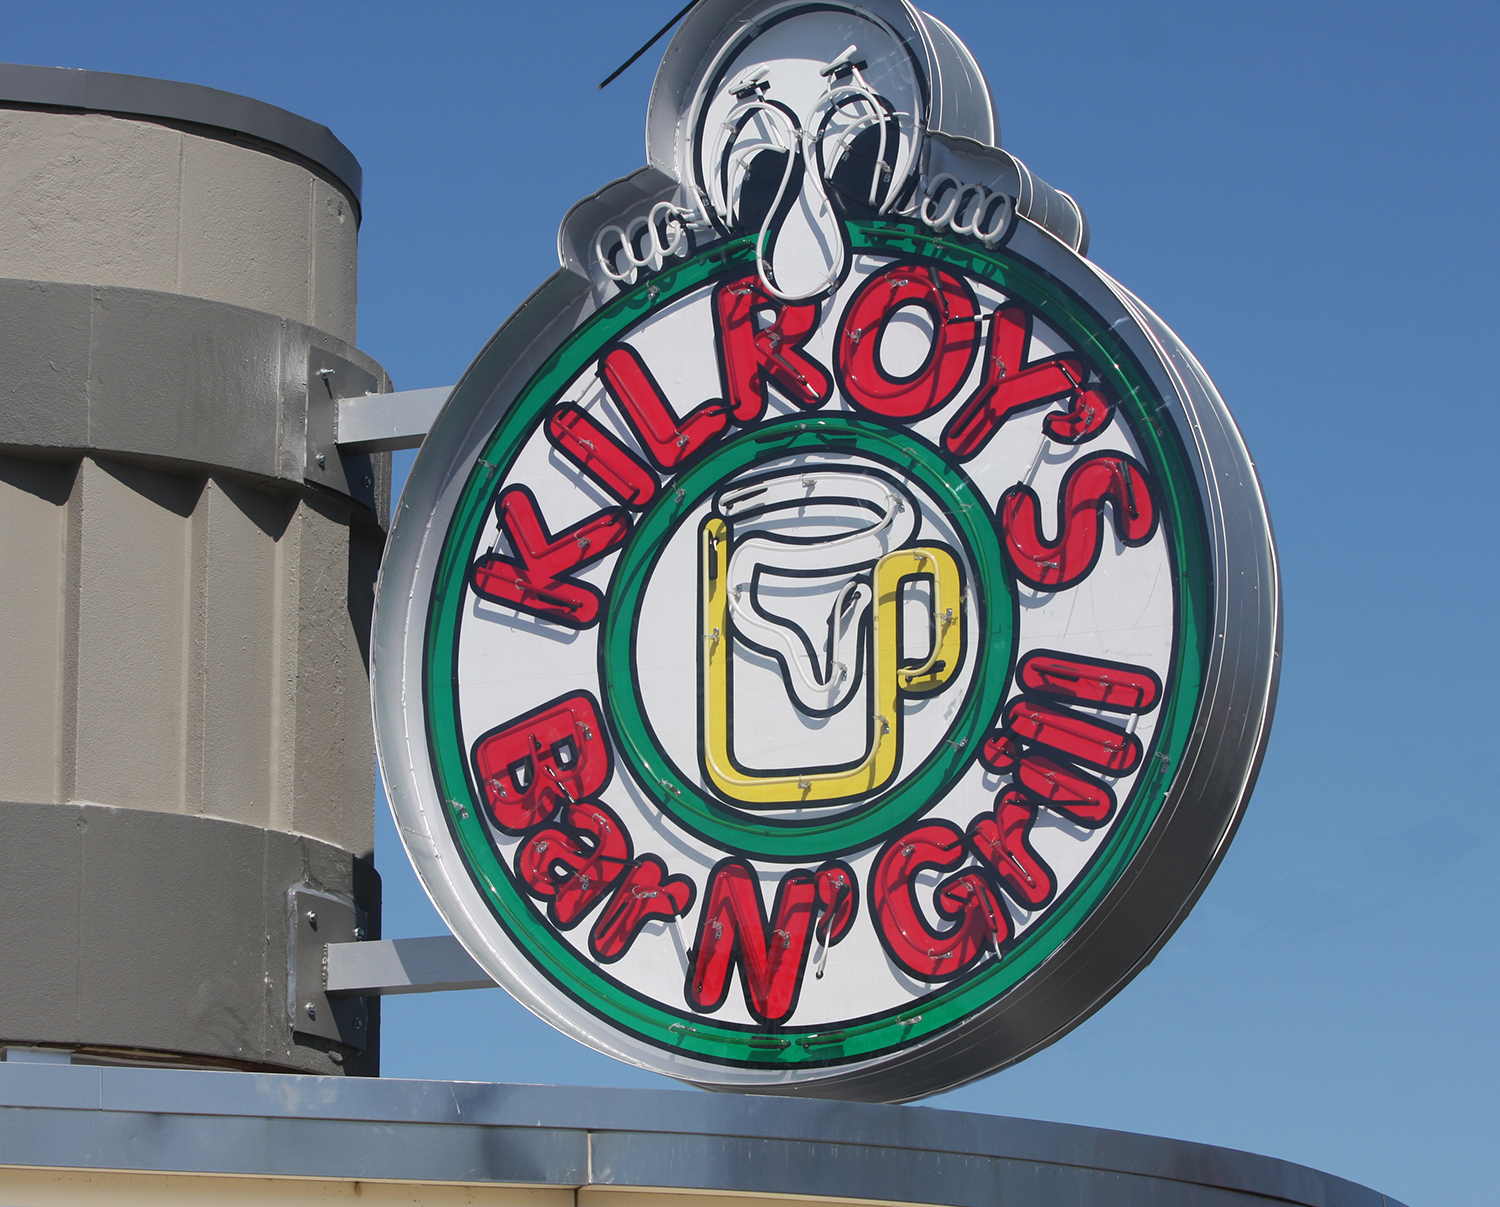 Kilroy's Neon Projecting Sign